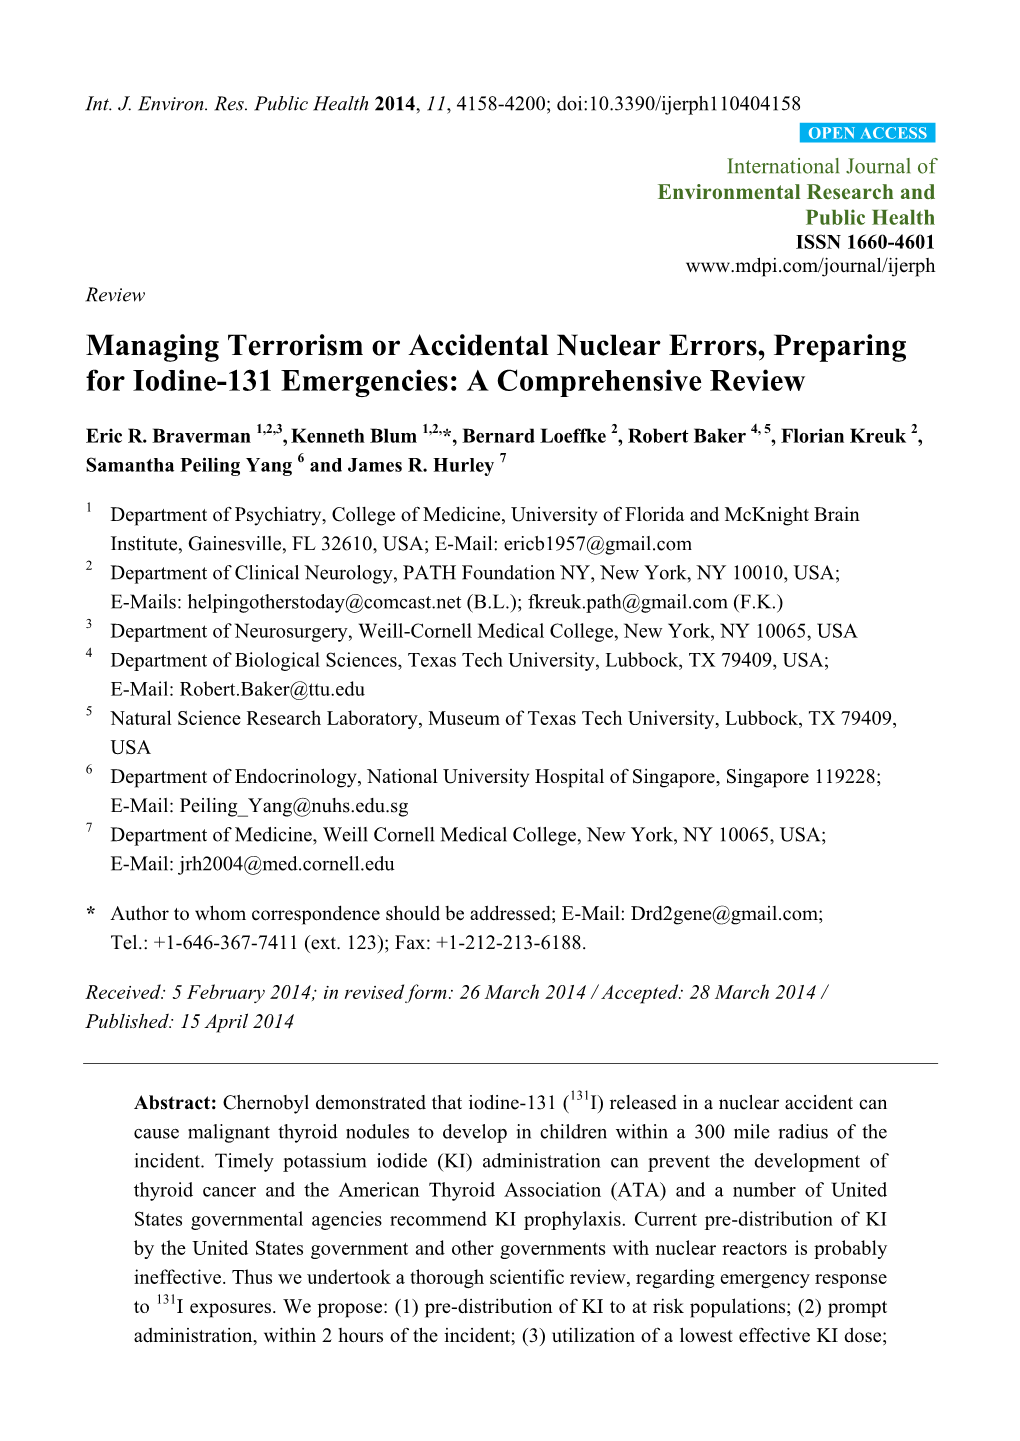 Managing Terrorism Or Accidental Nuclear Errors, Preparing for Iodine-131 Emergencies: a Comprehensive Review